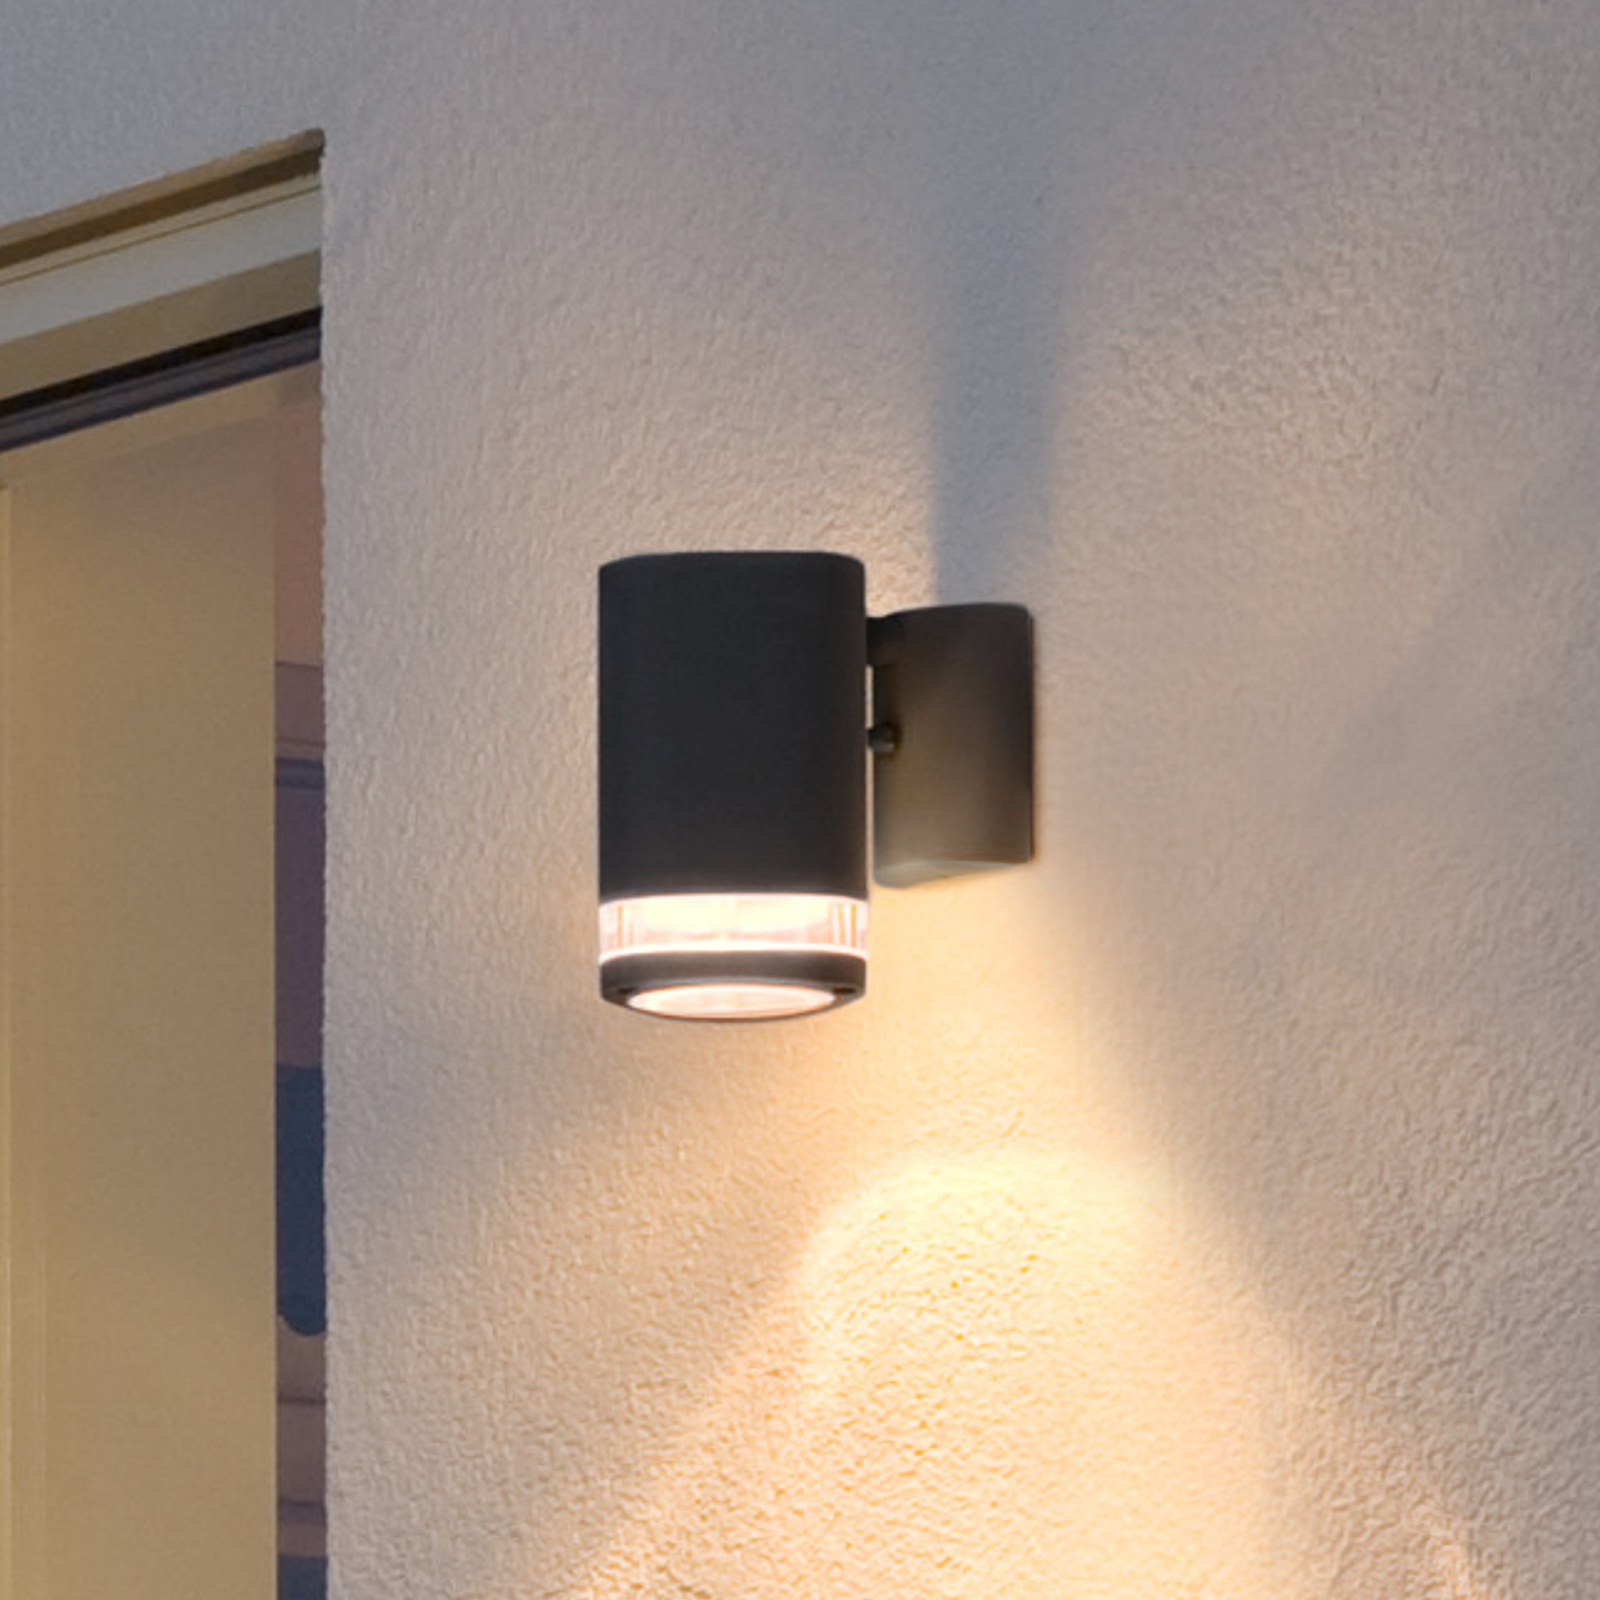 Modena outdoor wall light with slit, 1-bulb, black